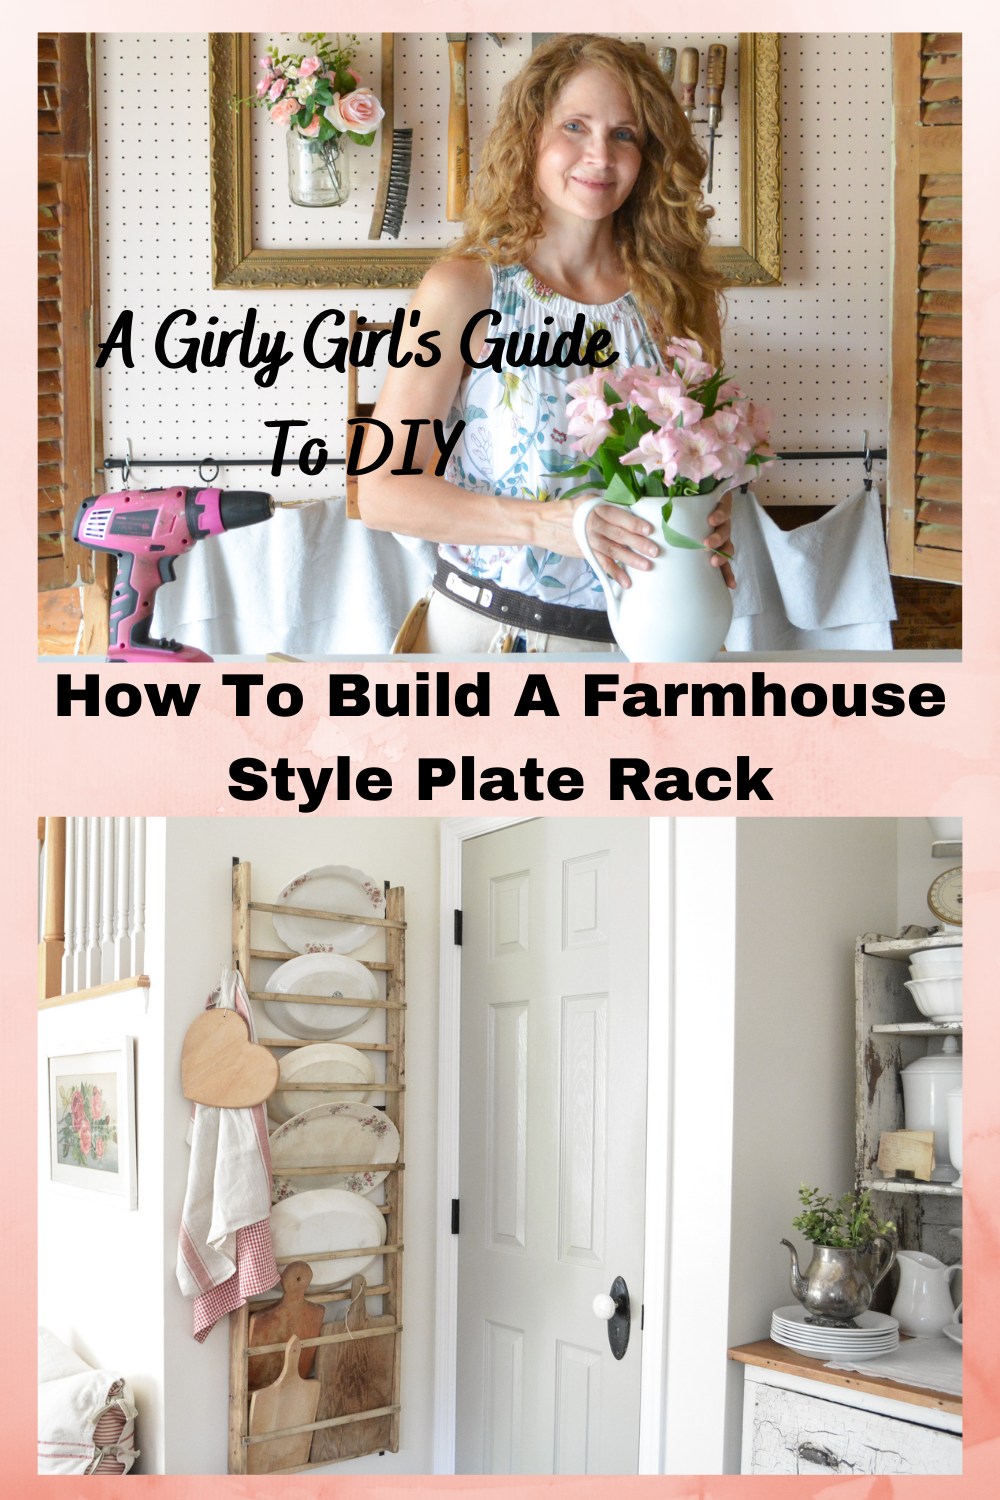 English cottage plate rack: a pretty + simple DIY project for my kitchen -  Quintessentially Quinlan